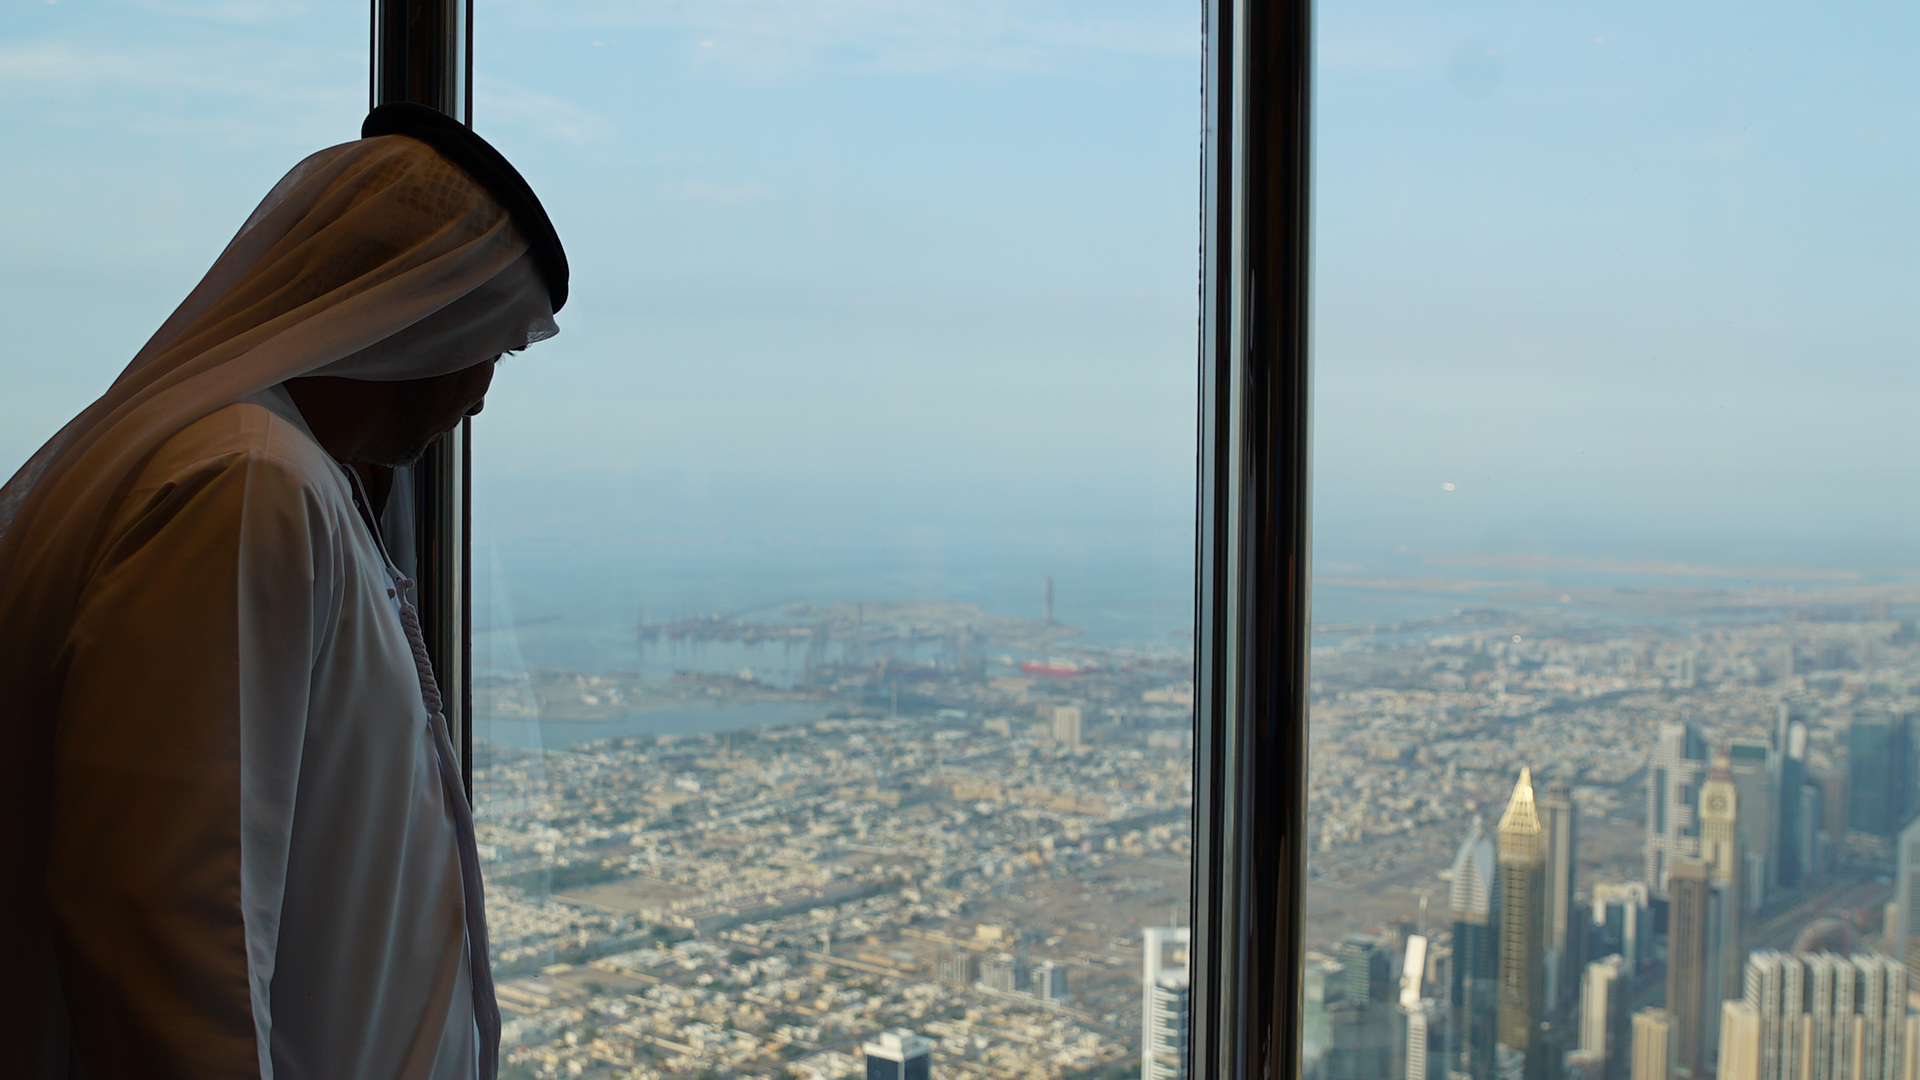 Ahmaad Emaar looking out the window. This is from Abandoned Engineering. [Photo of the day - April 2022]